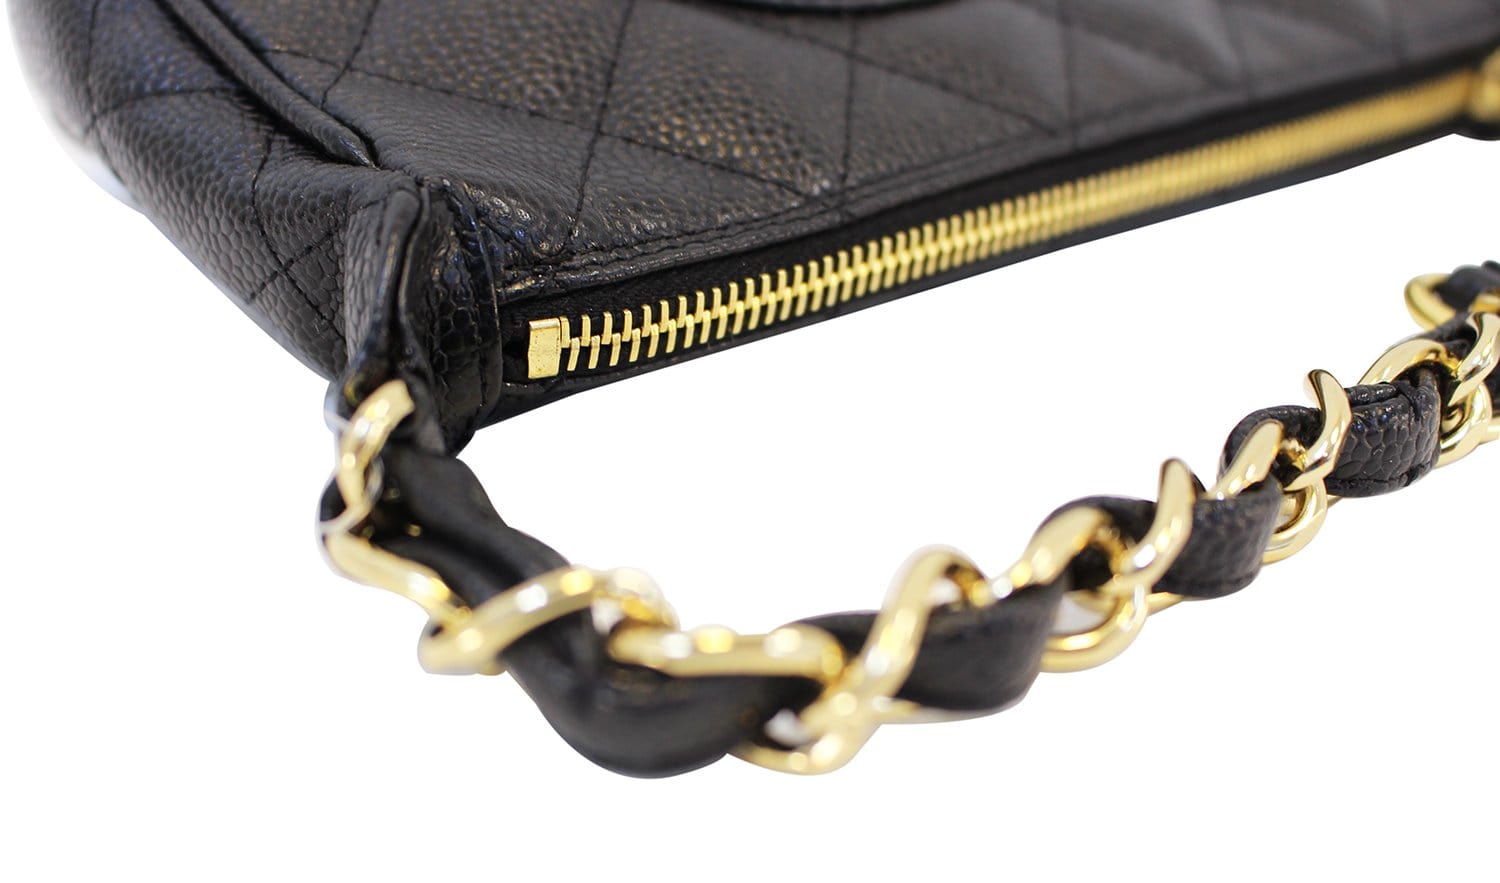 black chanel tote bag with gold chain used